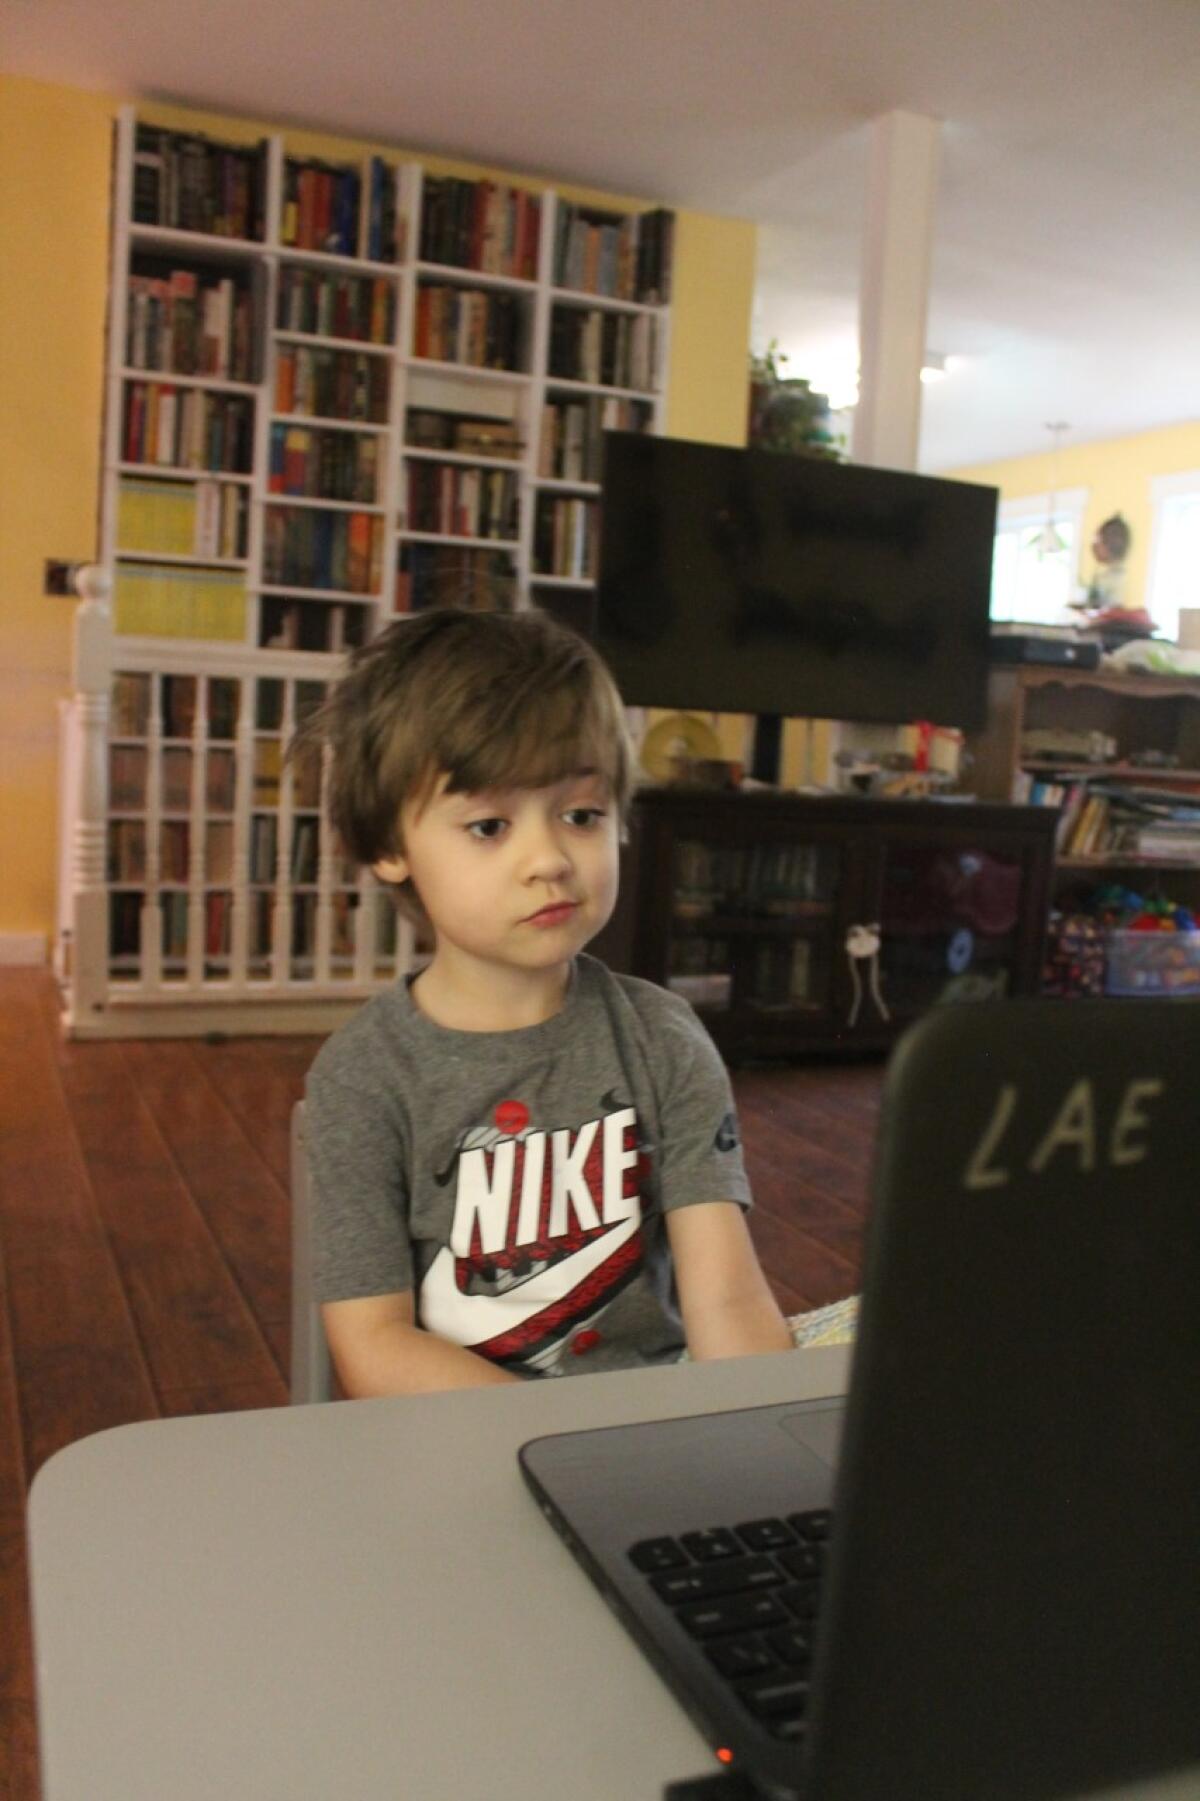 A young boy sits in front of a laptop set up on a desk